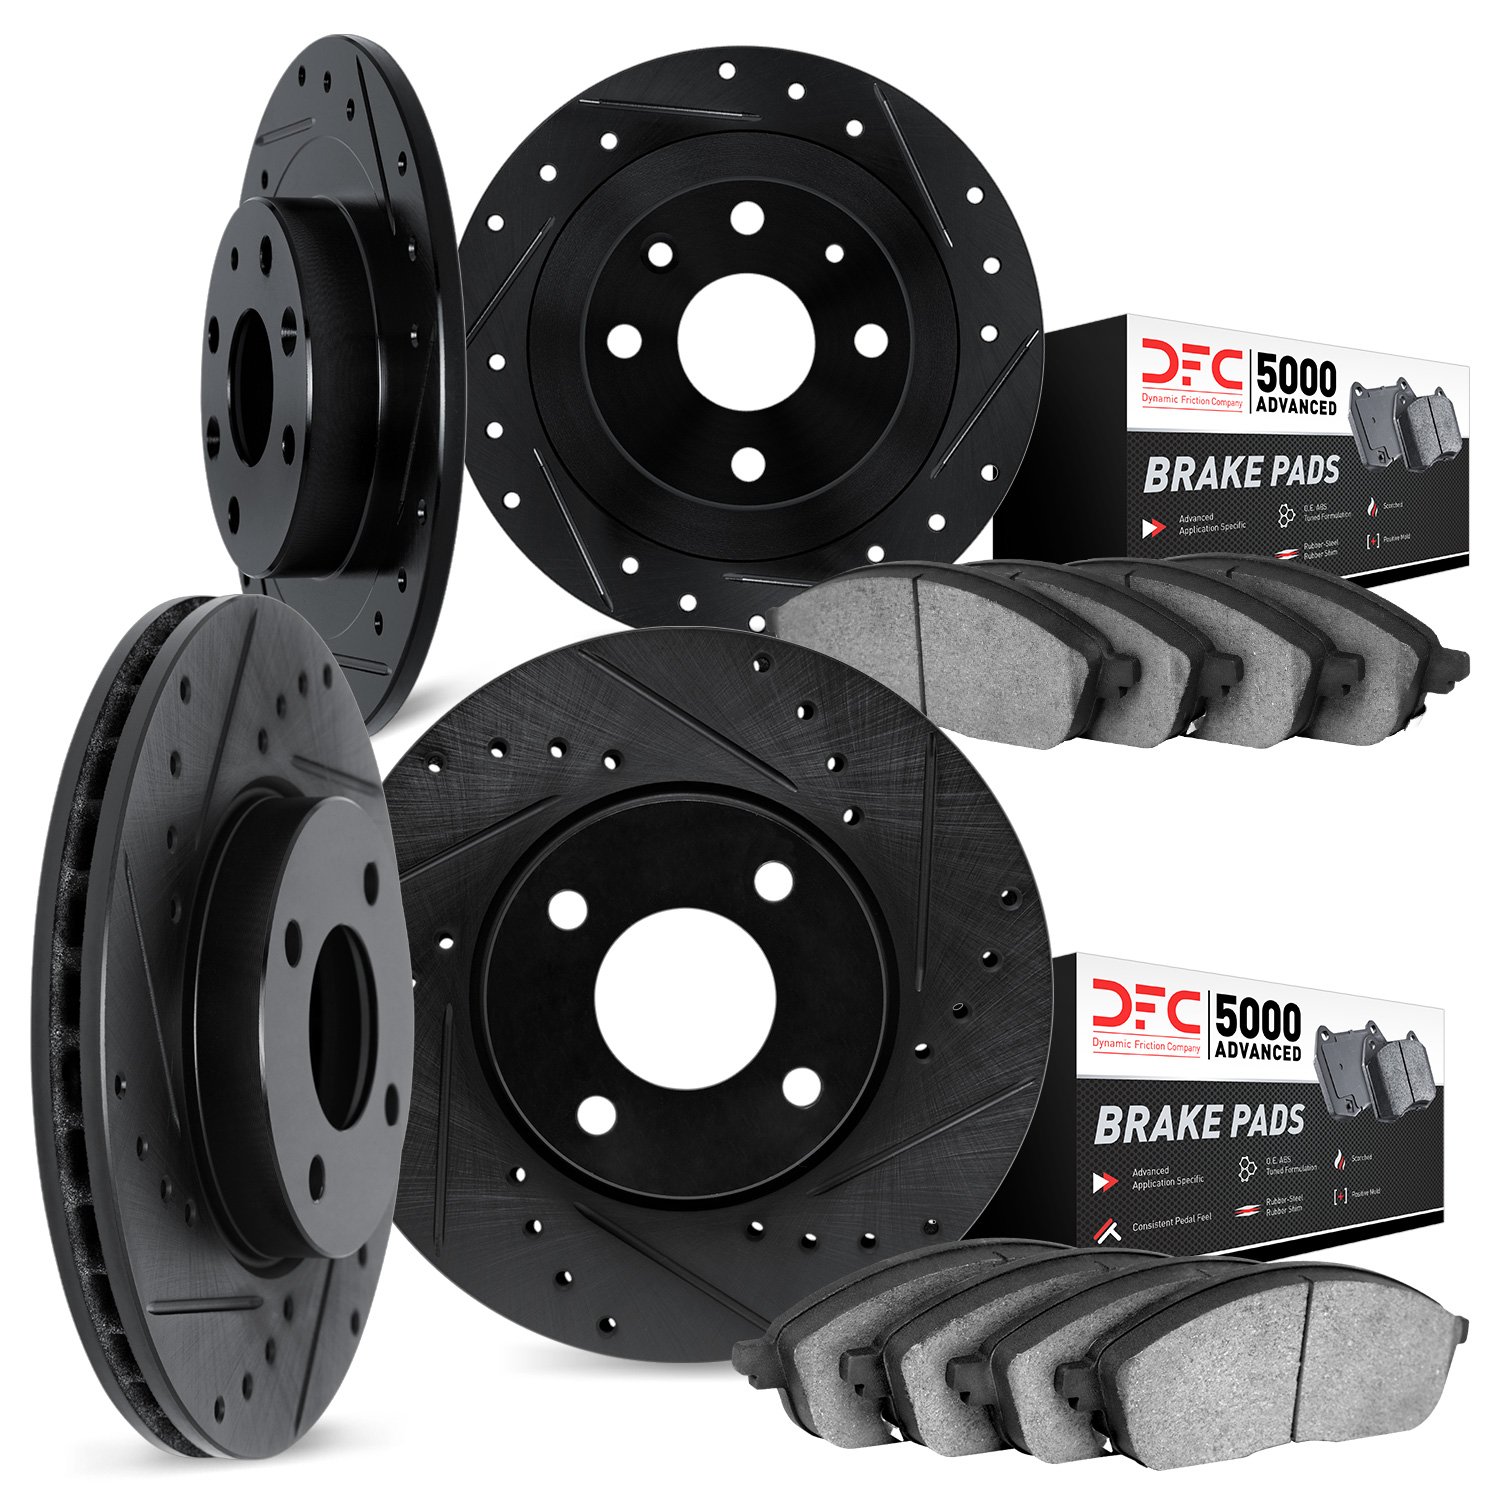 8504-67066 Drilled/Slotted Brake Rotors w/5000 Advanced Brake Pads Kit [Black], 1979-1981 Infiniti/Nissan, Position: Front and R